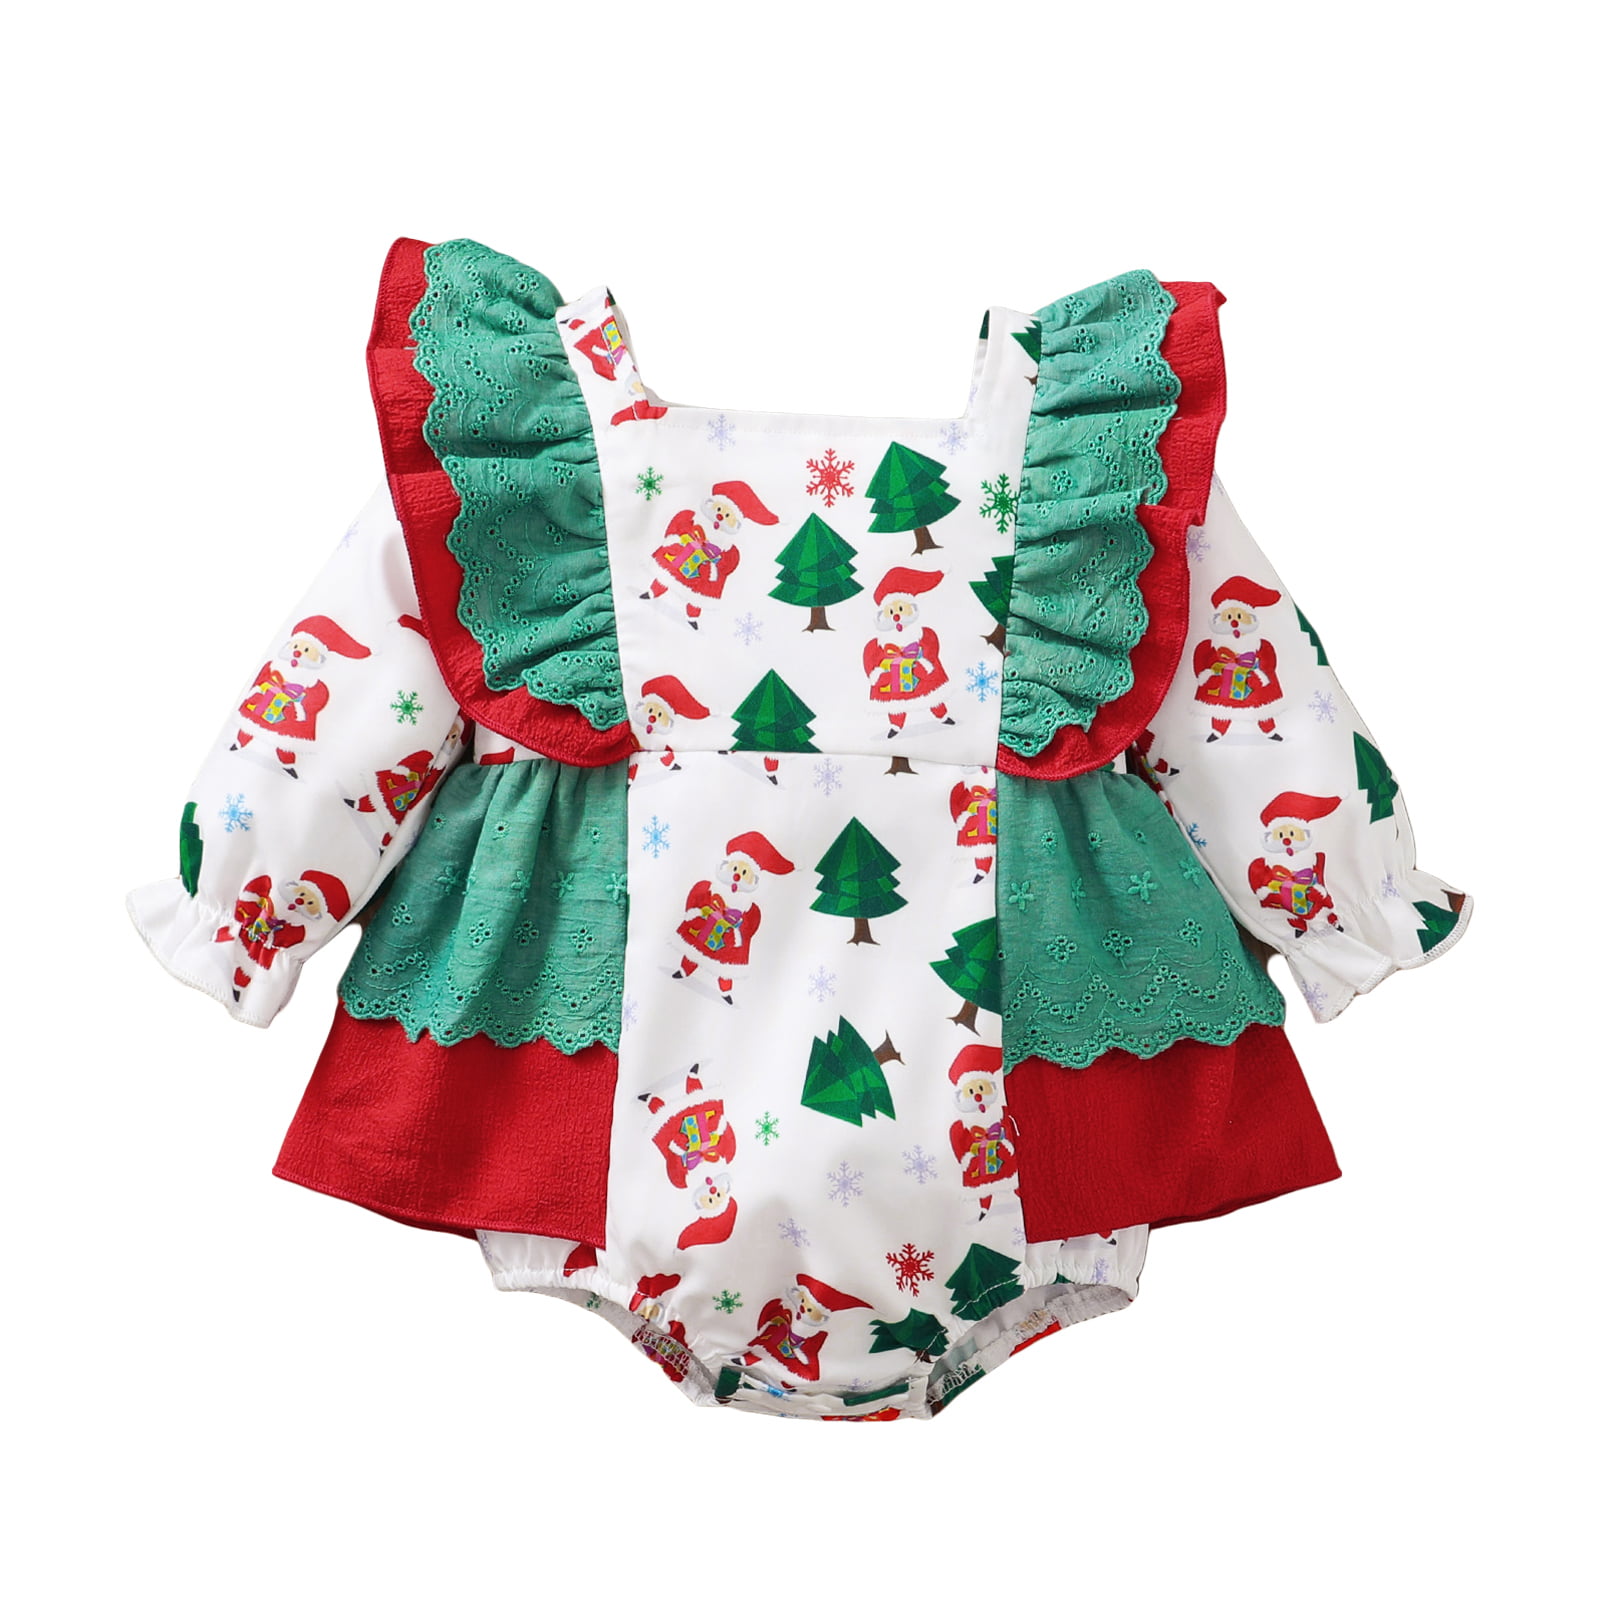 Baby-Infant-Girl-Ruffle-Long-Sleeve-Romper-Playsuit-Christmas-12 months 